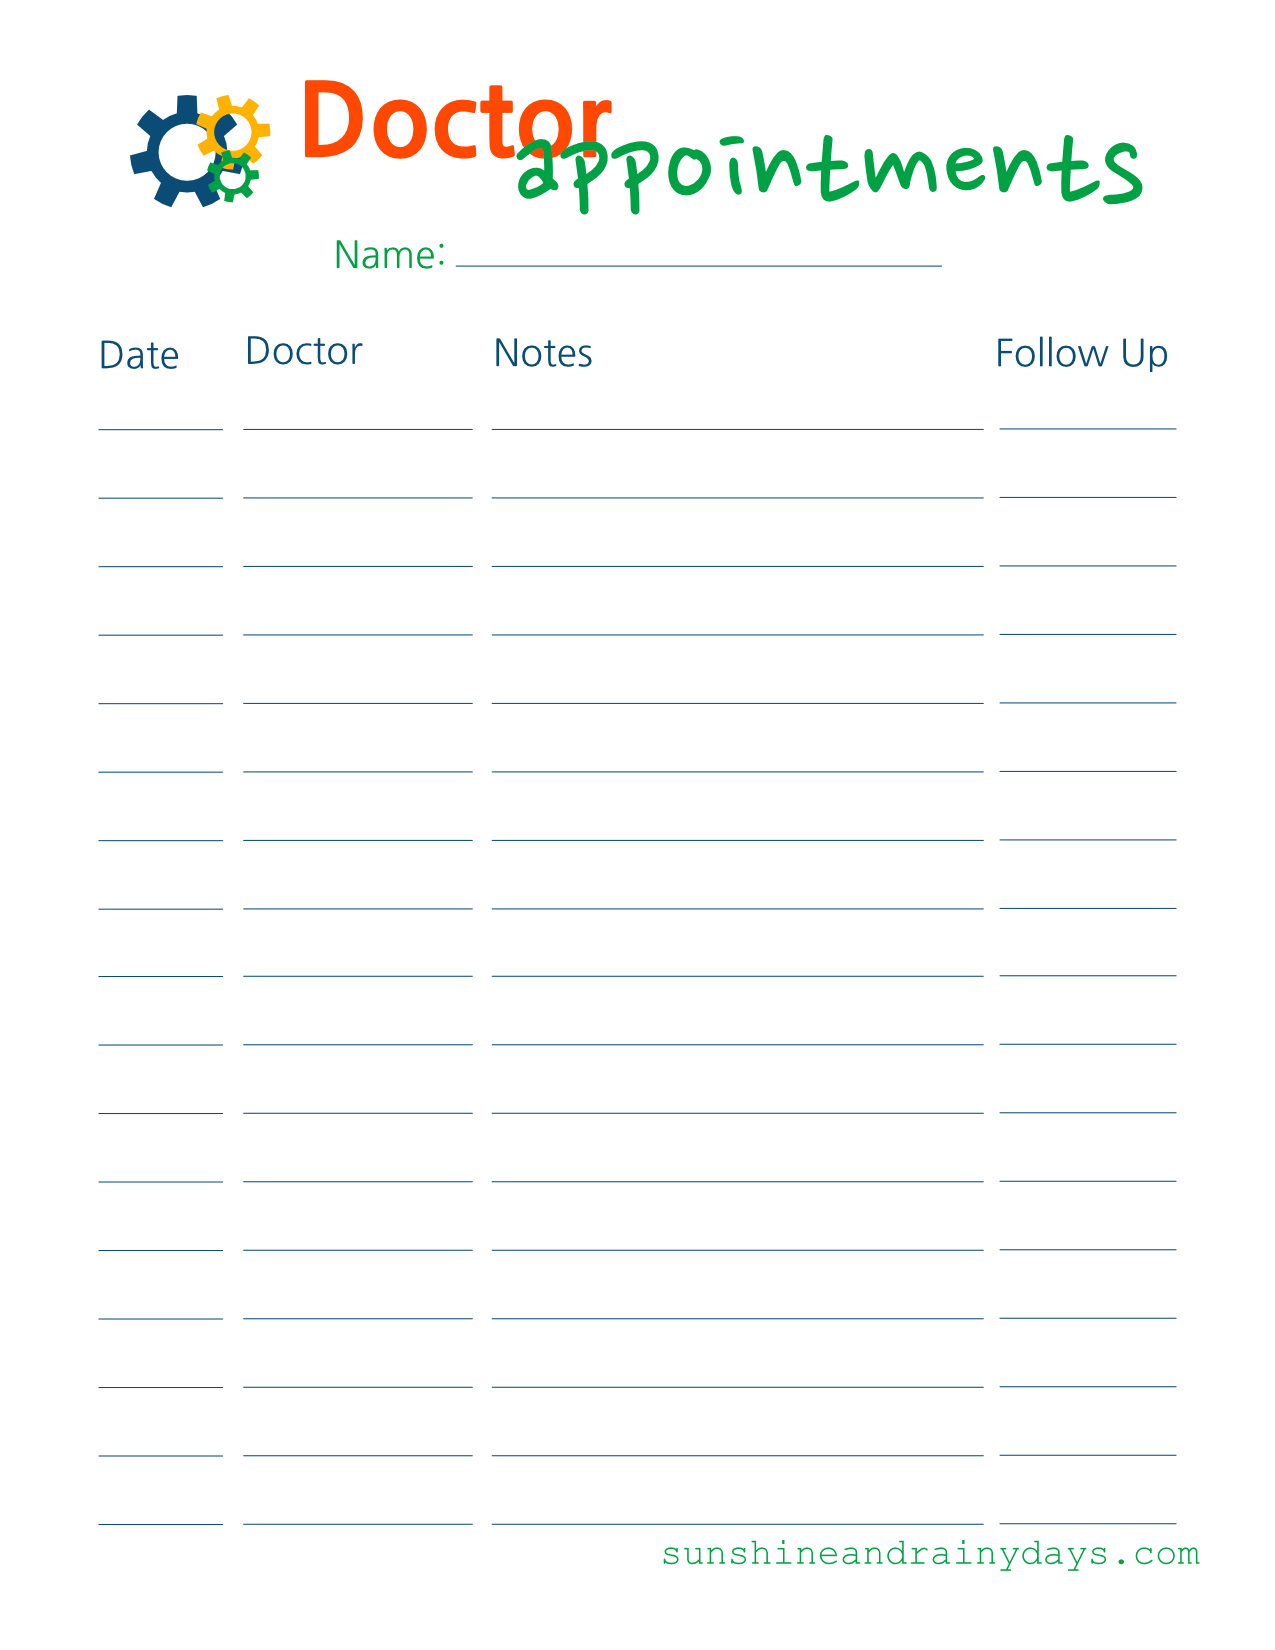 Appointment Spreadsheet Free within Doctor Appointments Free Printable